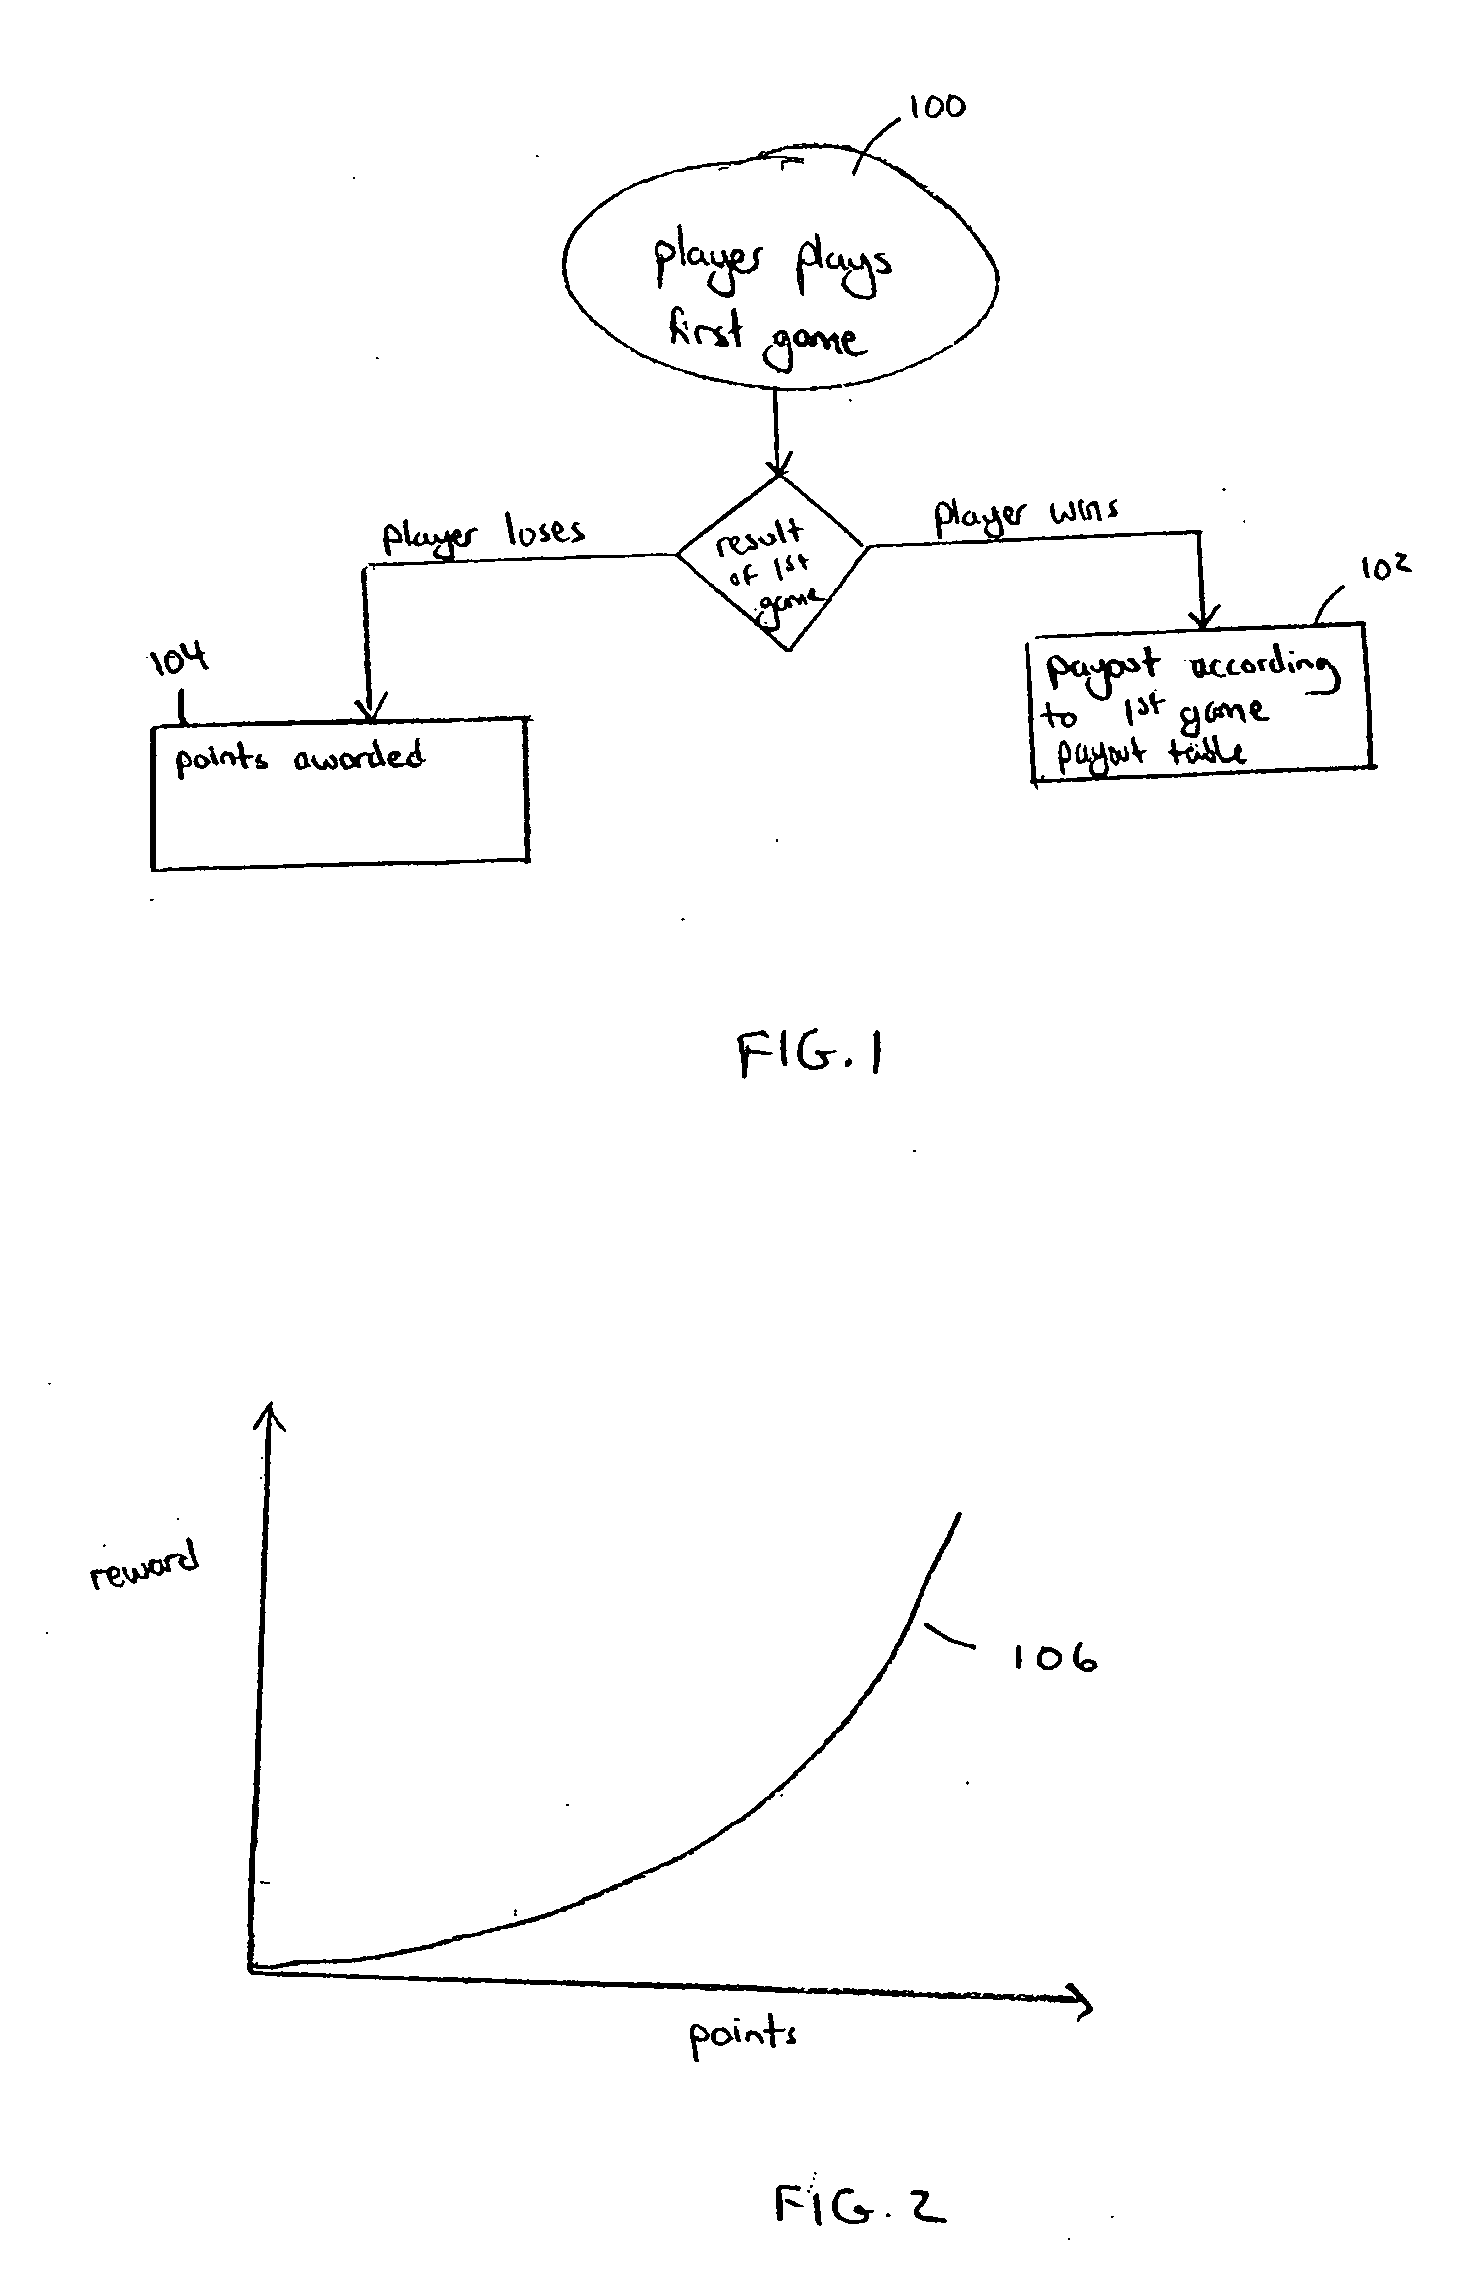 Method and apparatus for playing games